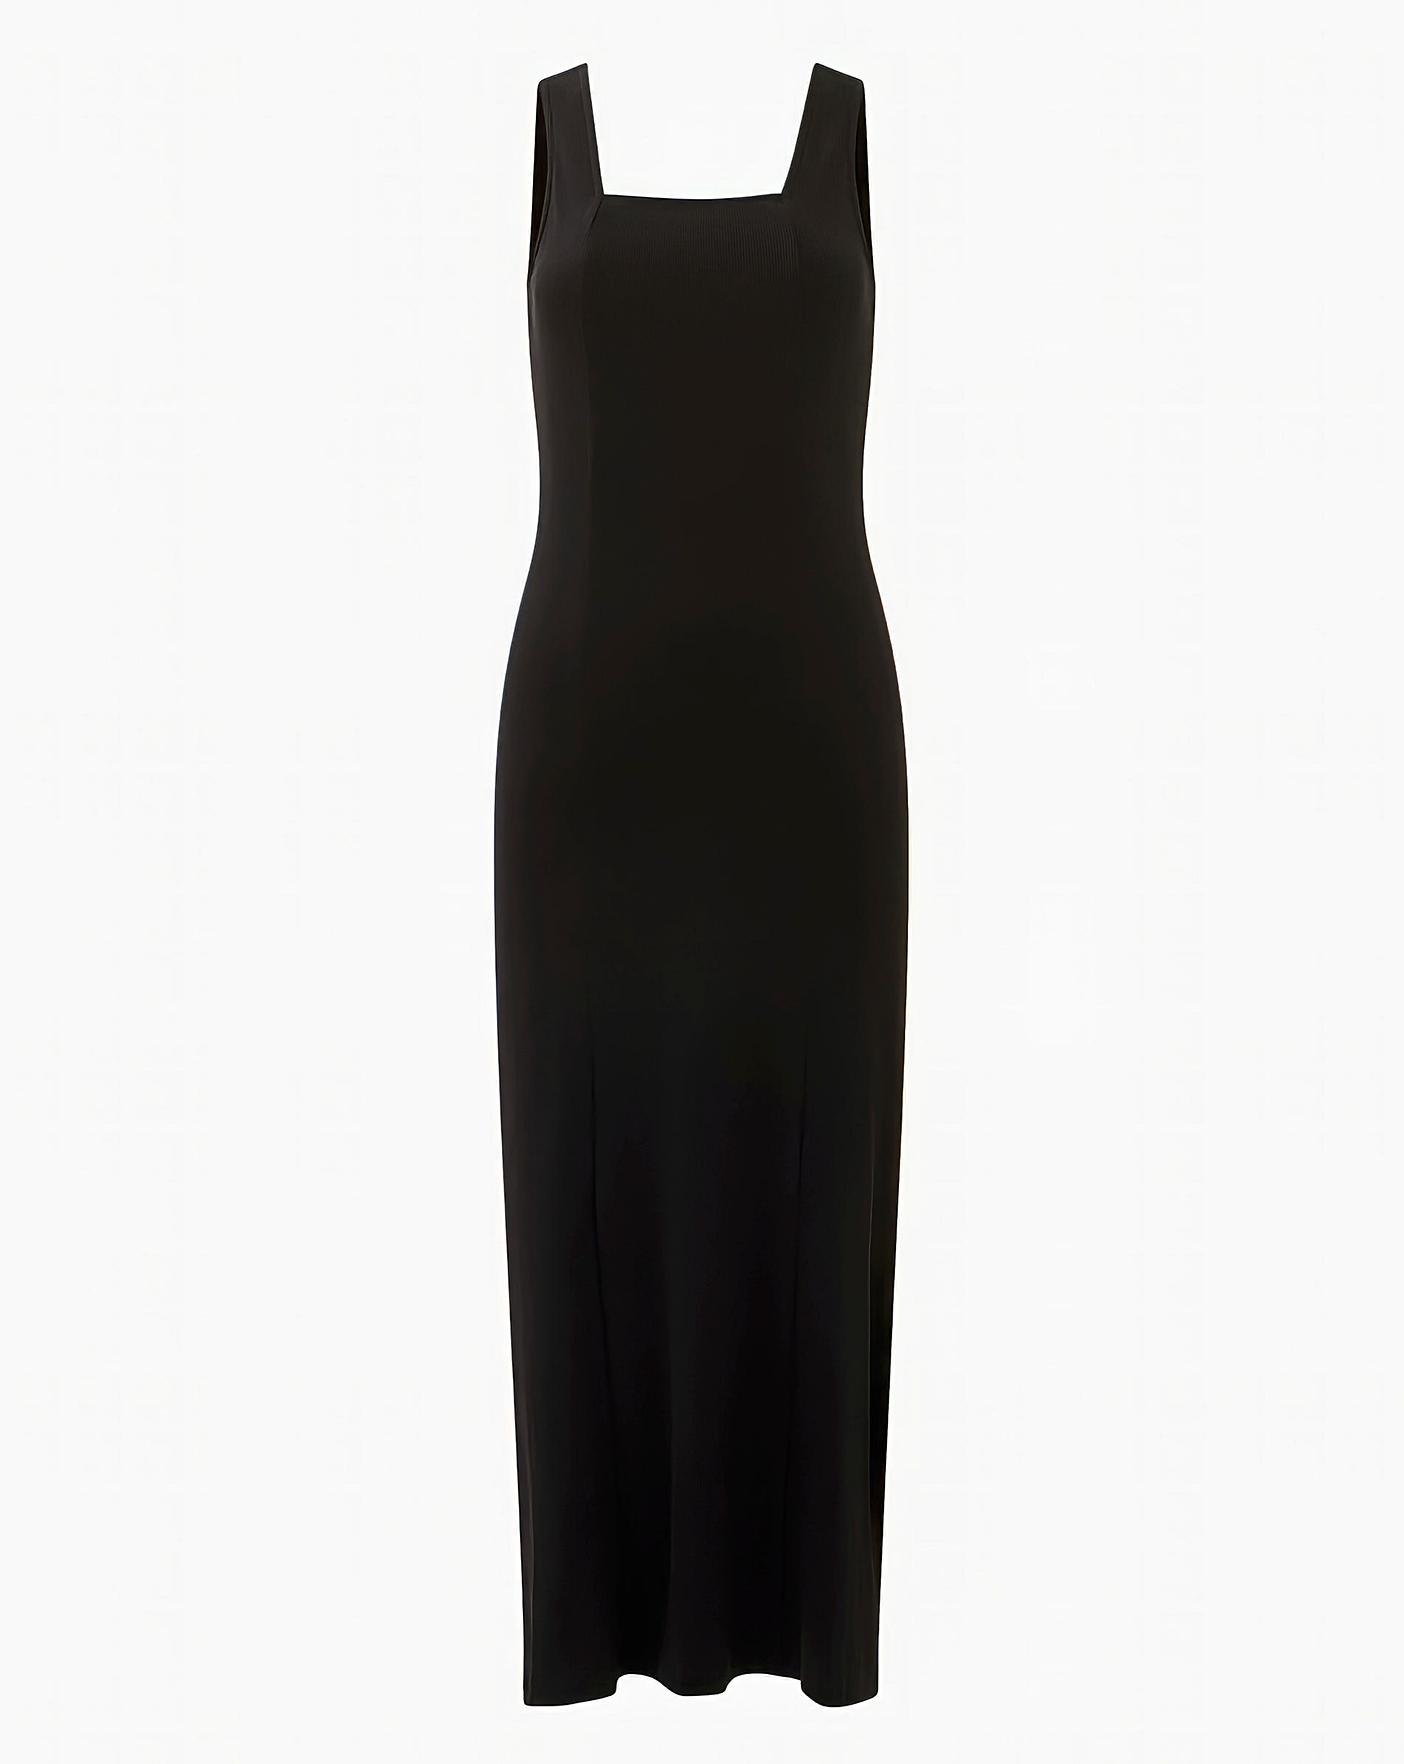 French connection Ribbed Dress | J D Williams